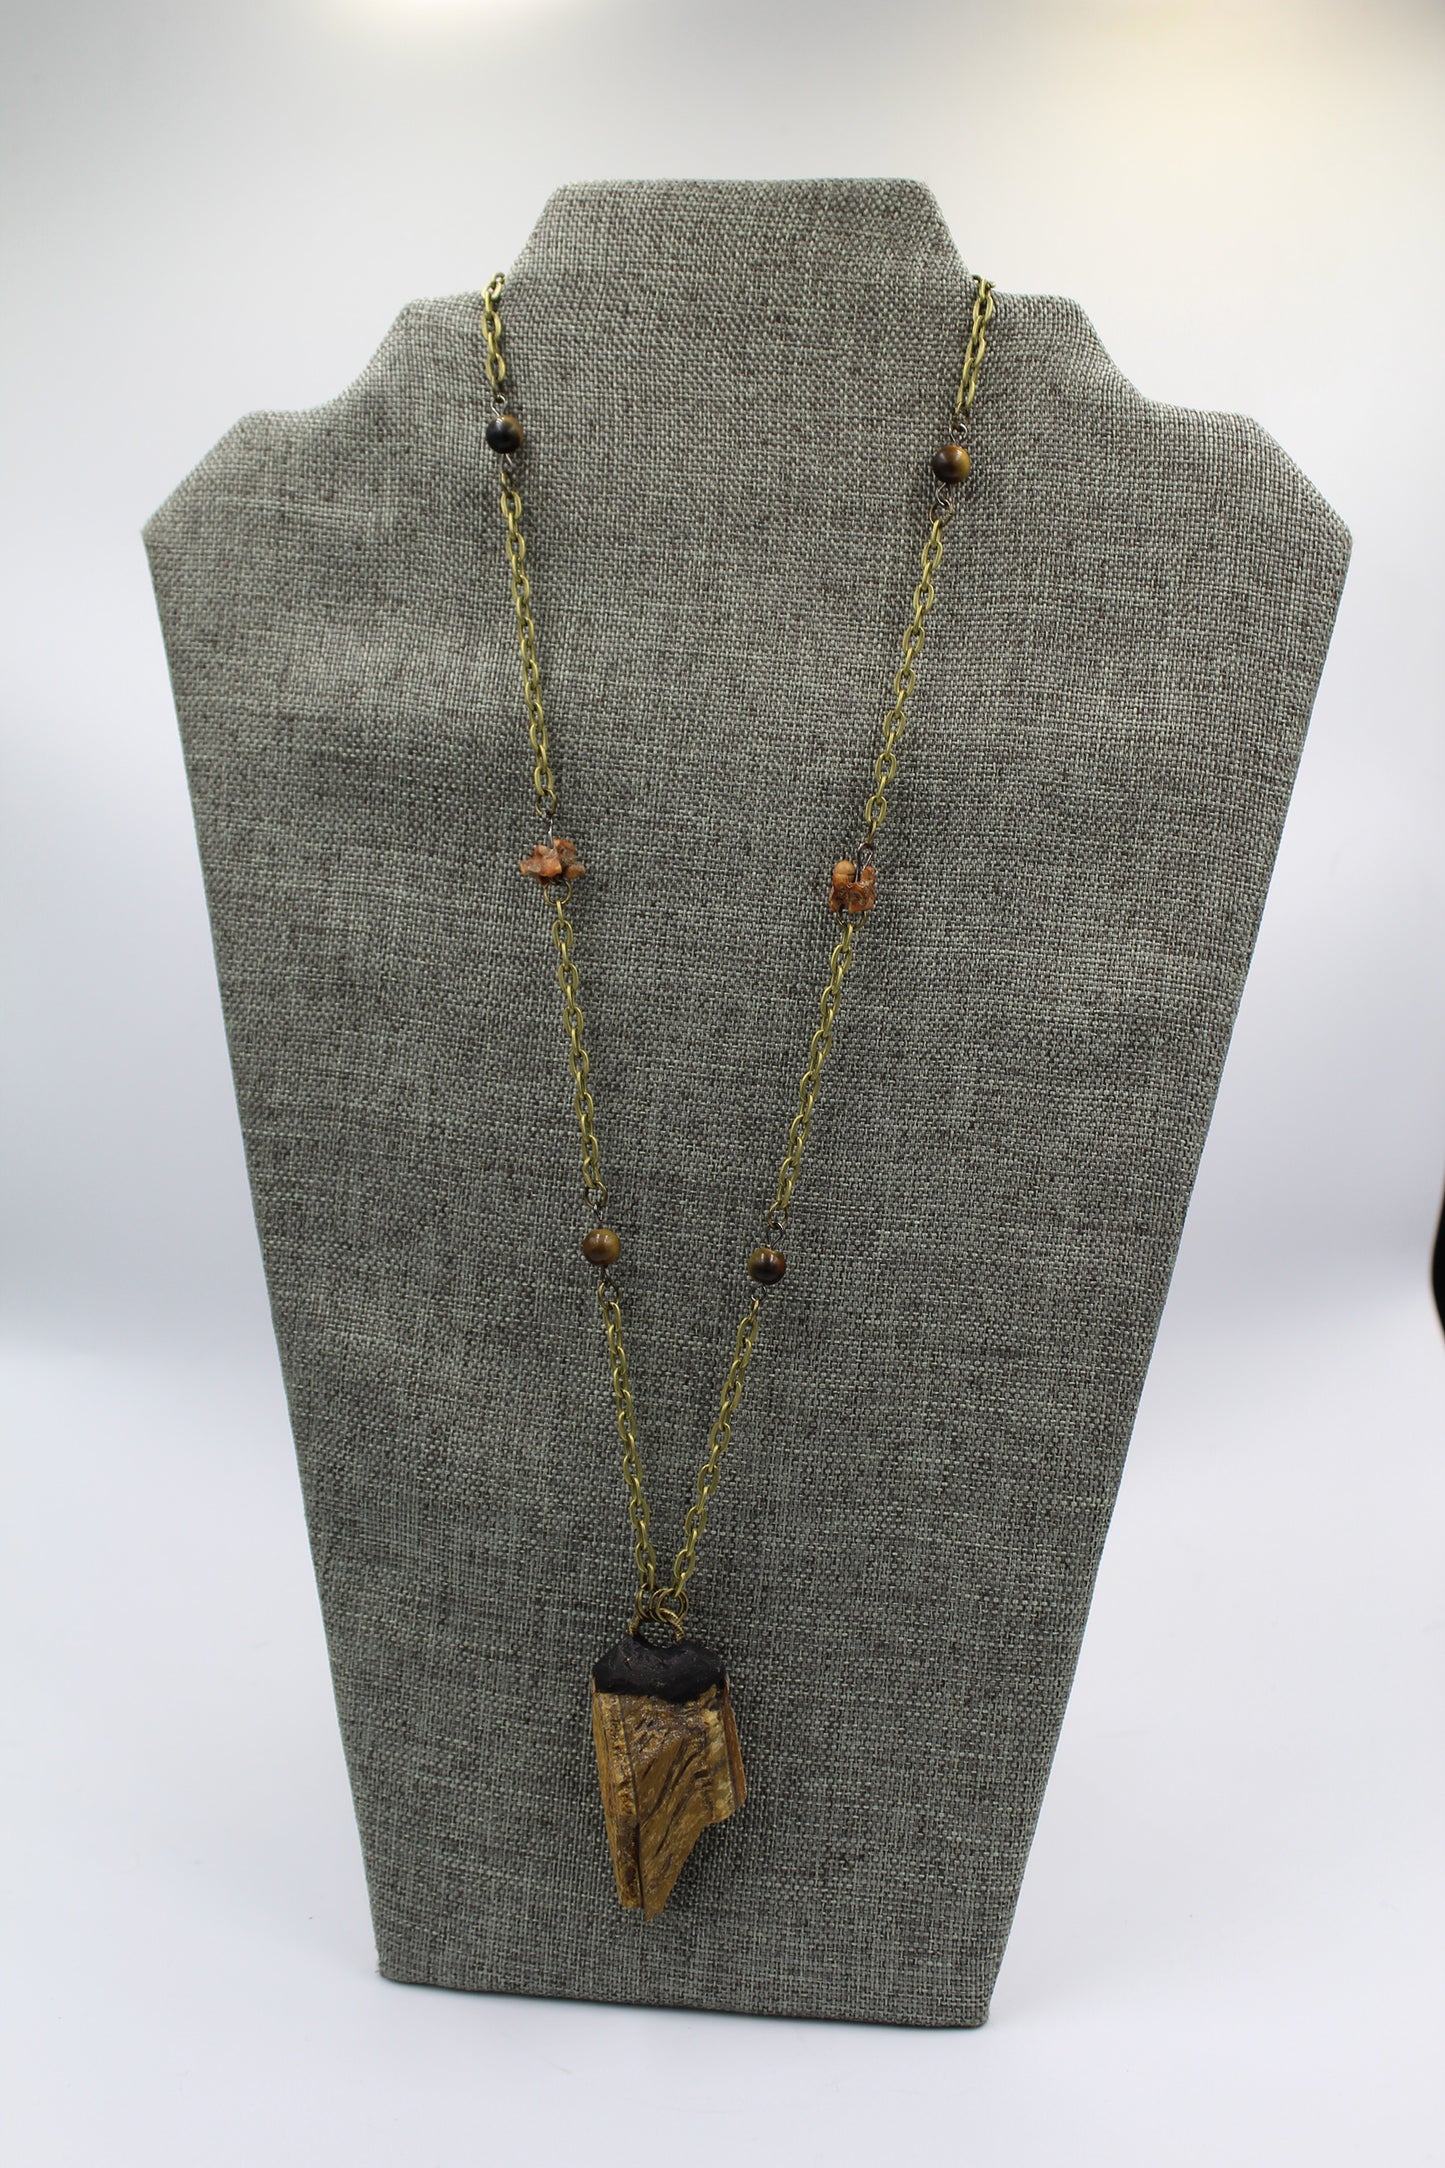 Hekas Creative: Tigers eye pendant with 6mm tigers eye beads and unbleached snake vertebrae